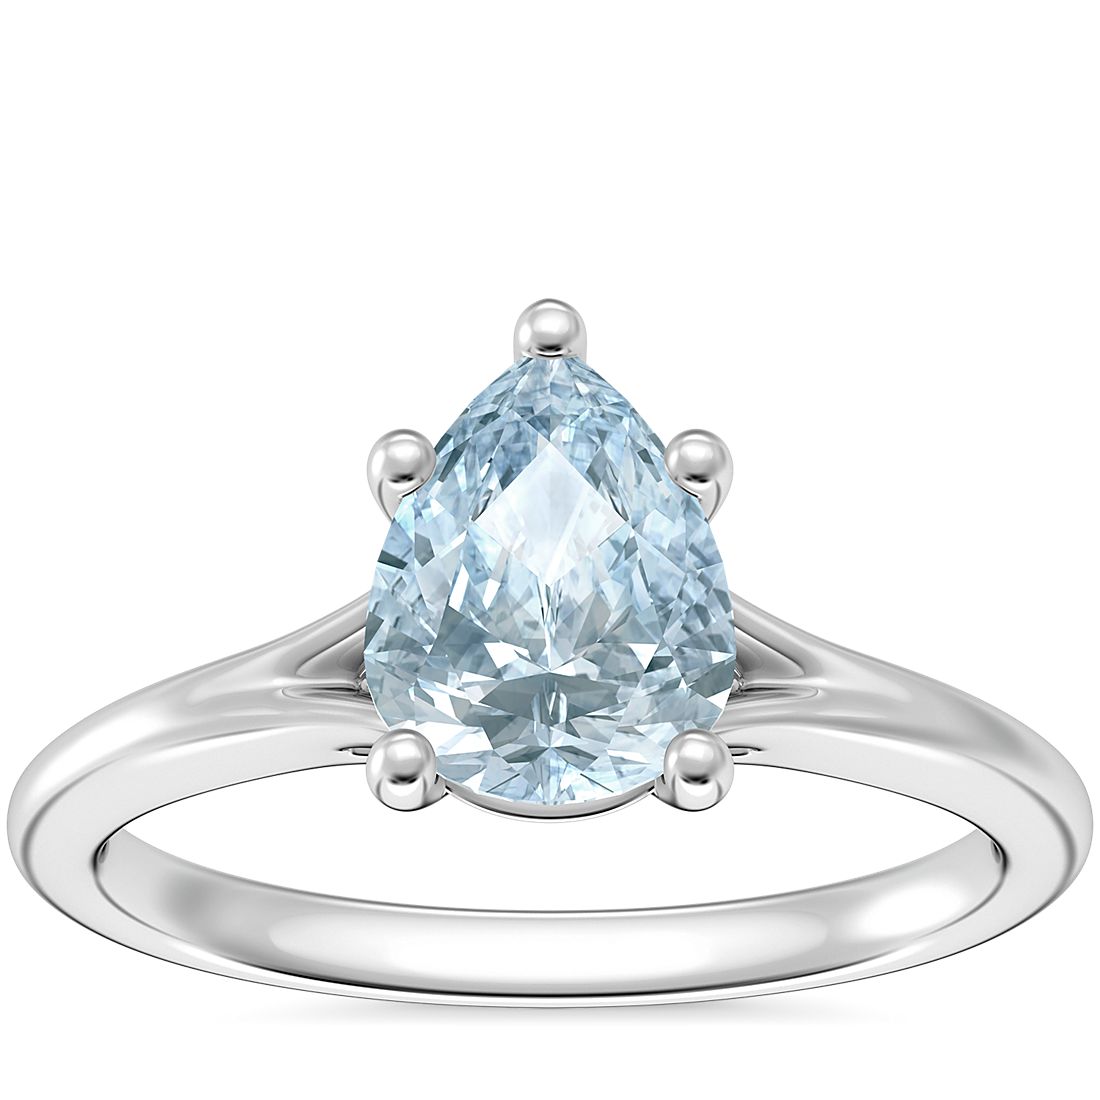 Petite Split Shank Solitaire Engagement Ring with Pear-Shaped Aquamarine in Platinum (8x6mm)